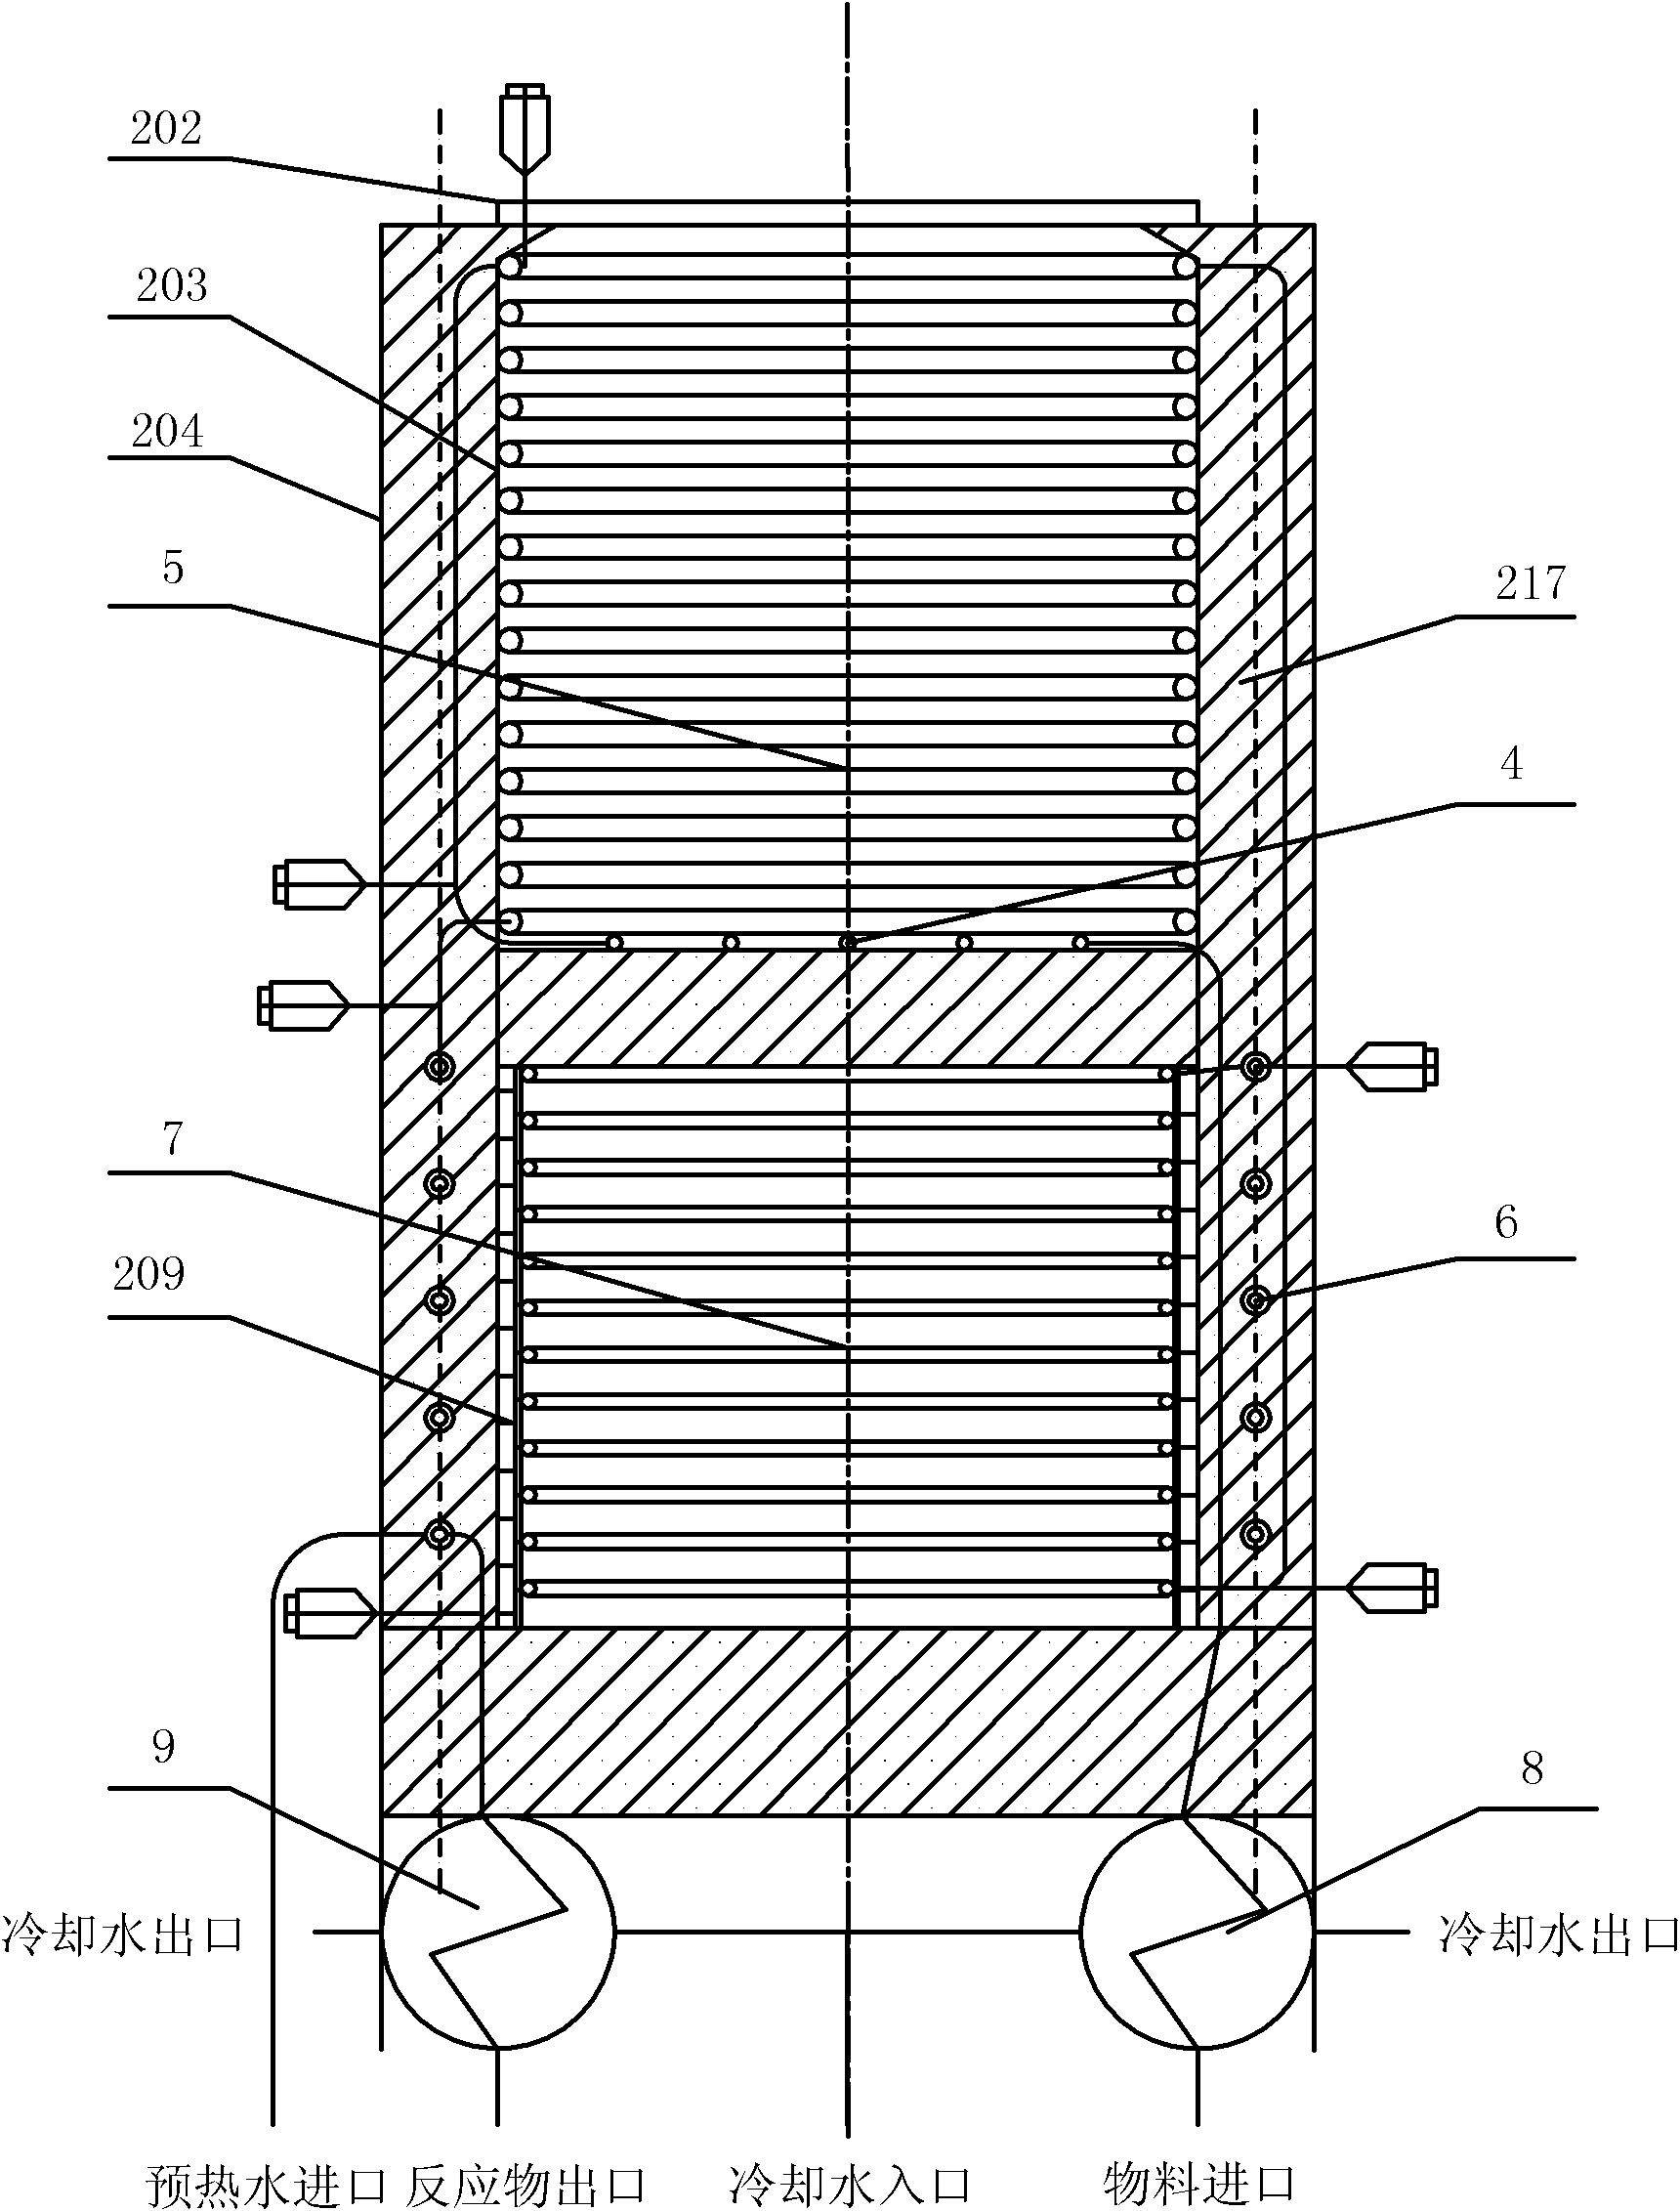 System and method for producing hydrogen by collecting solar energy in multi-plate mode and coupling biomass supercritical water gasification